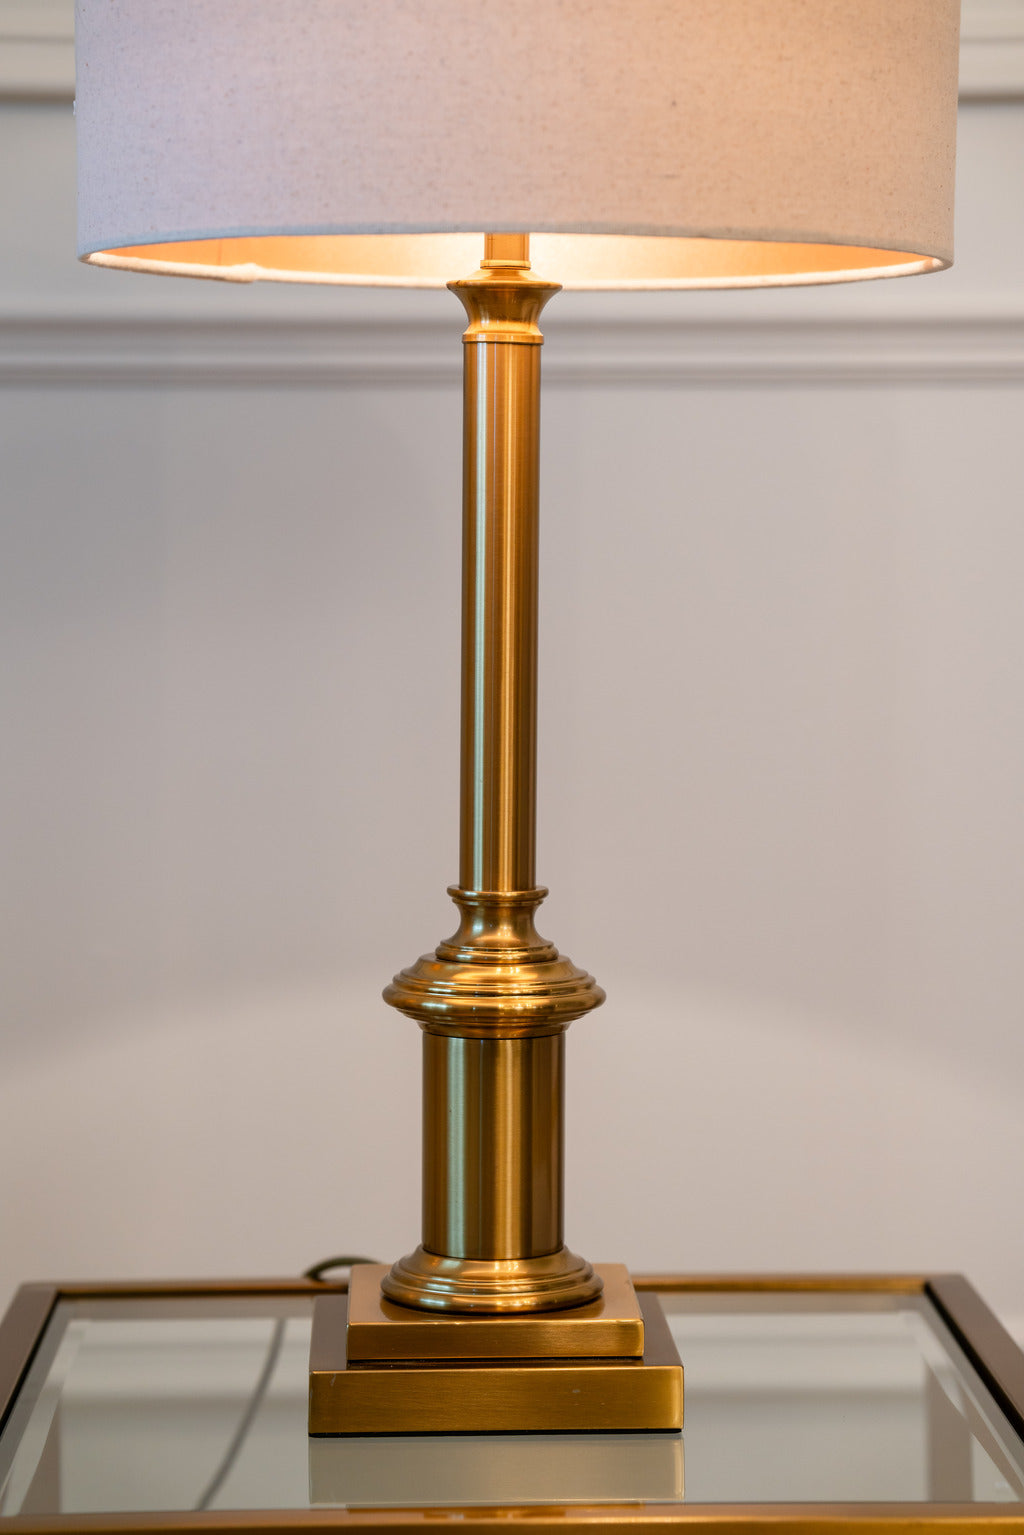 Gold lamp, Gold furniture, Gold table, Glass table, Modern furniture, blush lampshade